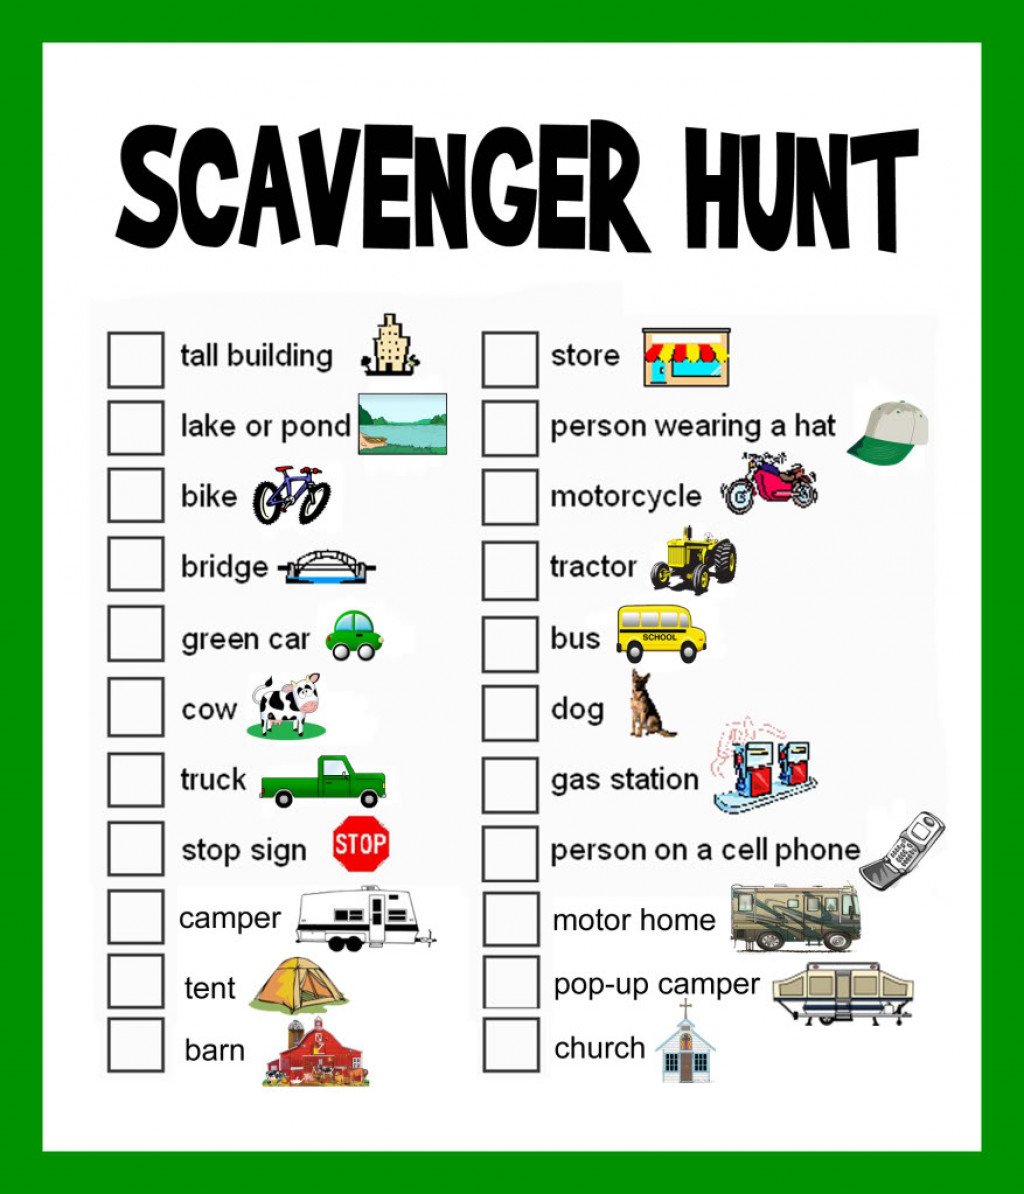 Scavenger Hunt Ideas Lists and Planning hubpages